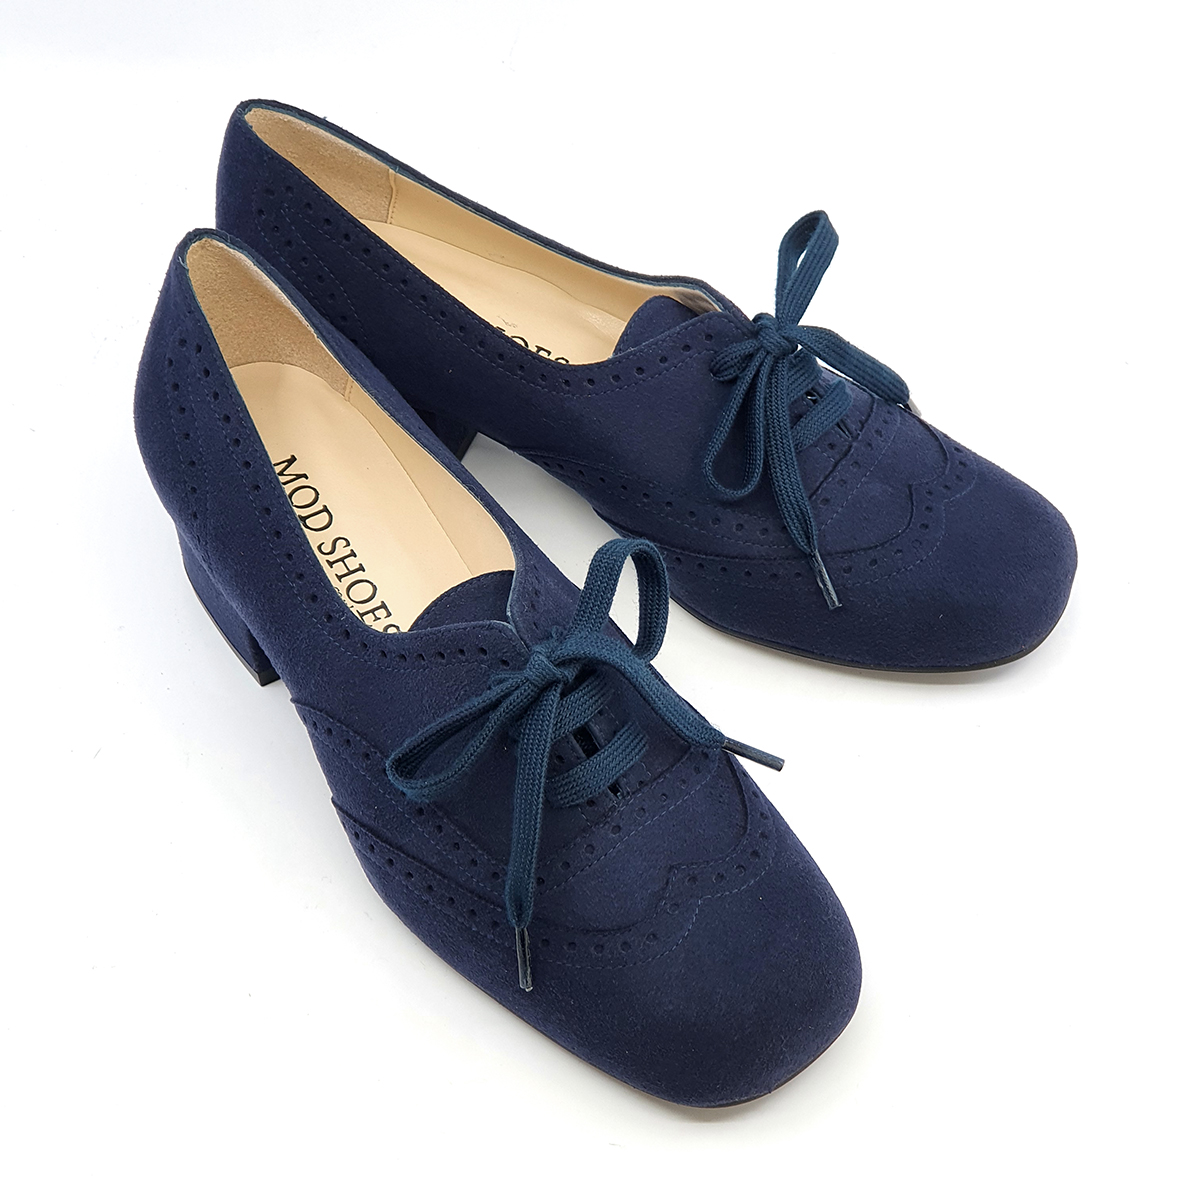 https://www.modshoes.co.uk/wp-content/uploads/2021/09/modshoes-ladies-40s-50s-60s-70s-style-brogue-shoes-vegan-navy-suede-effect-02.jpg